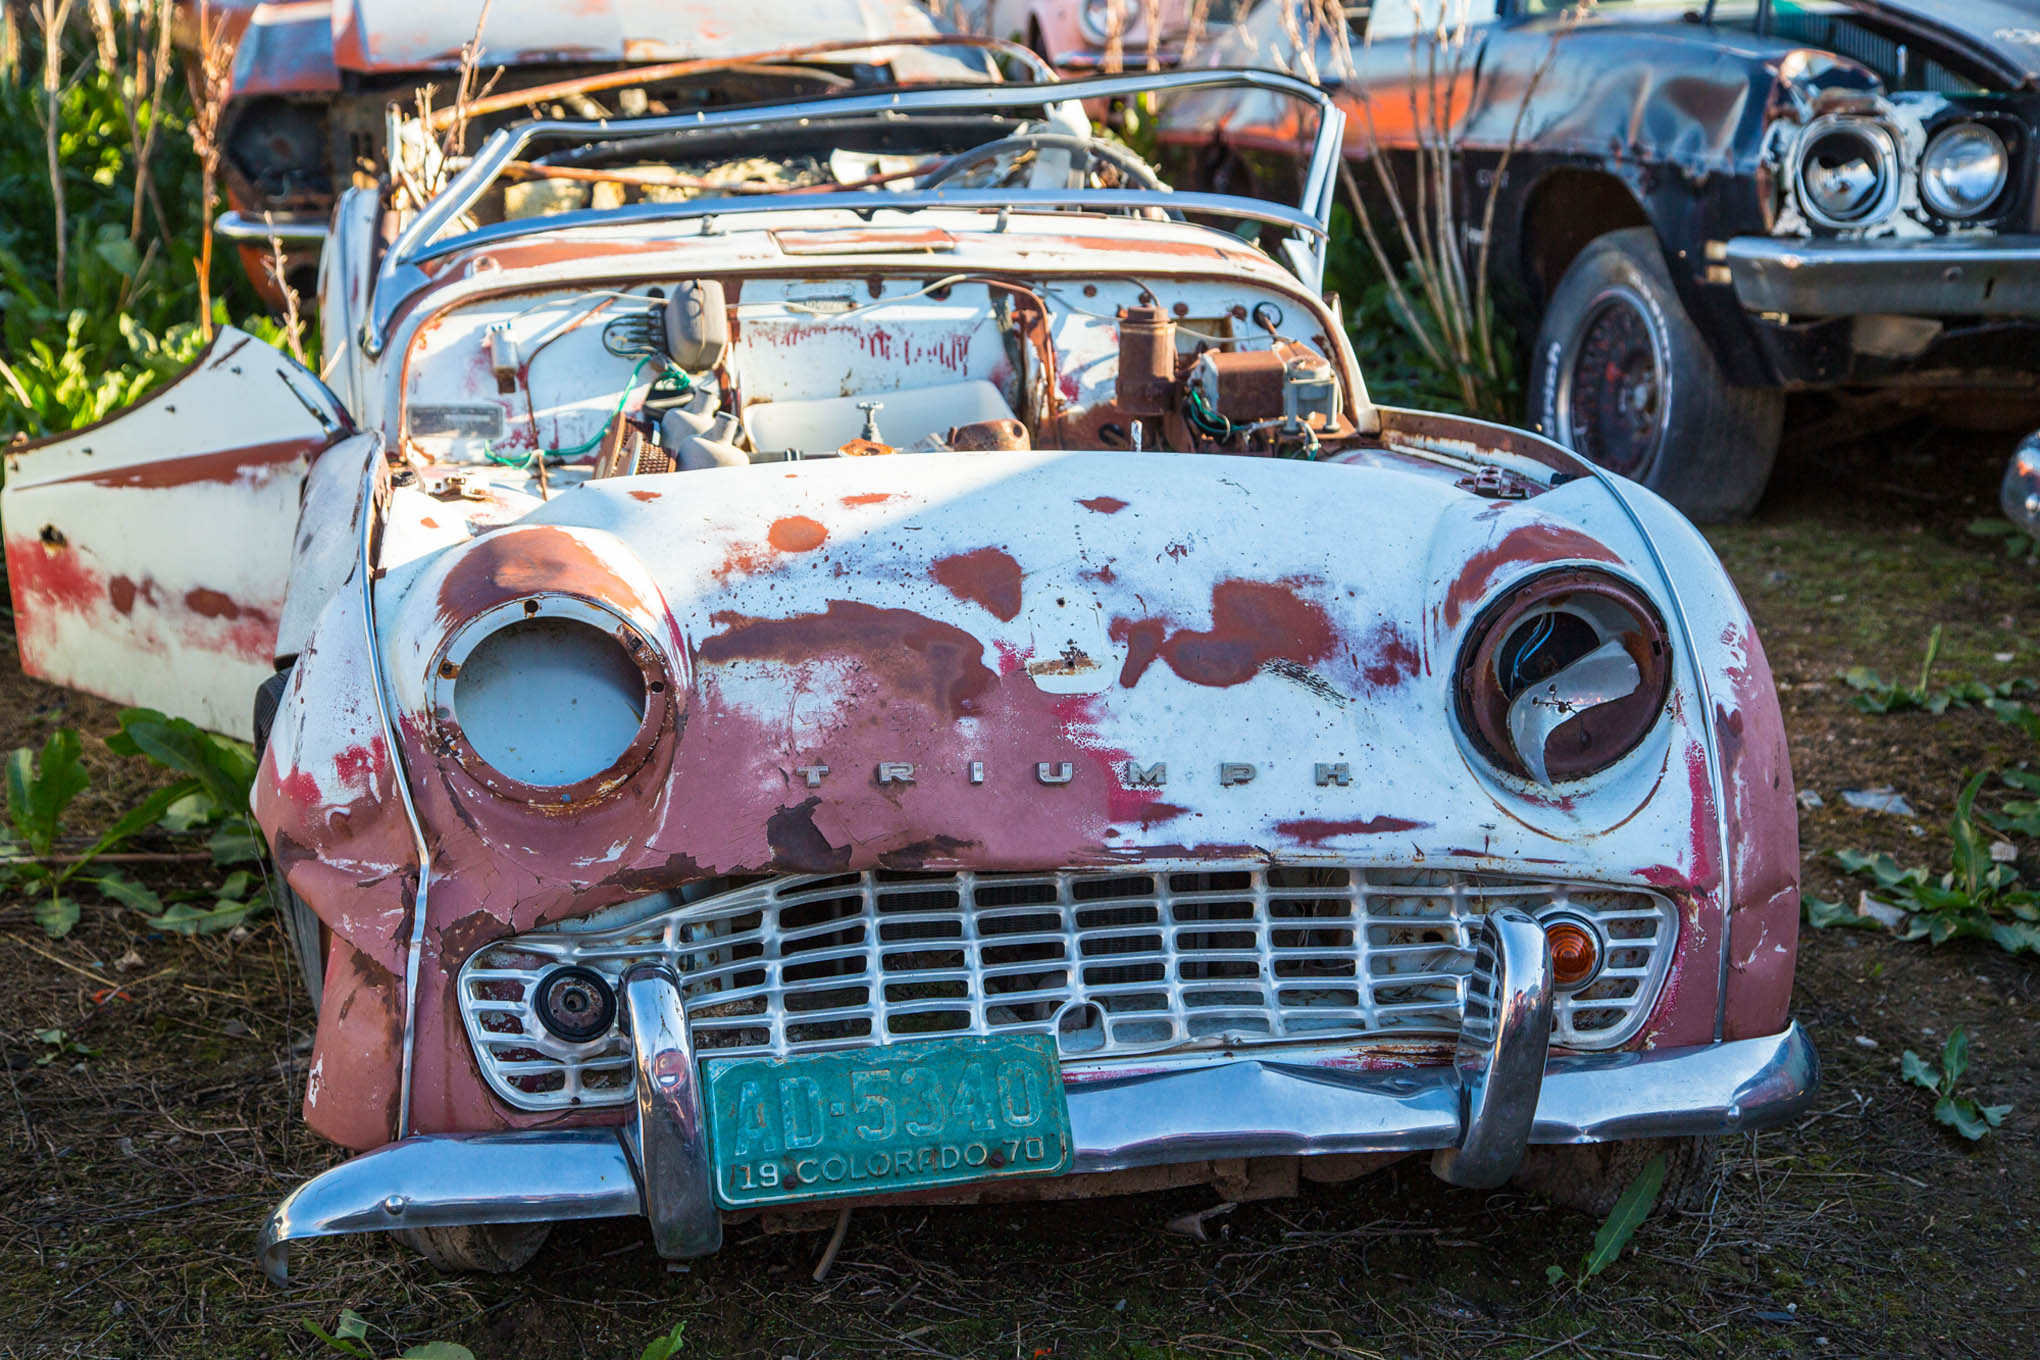 This Colorado Parts Yard has been Collecting Classic Cars for ...